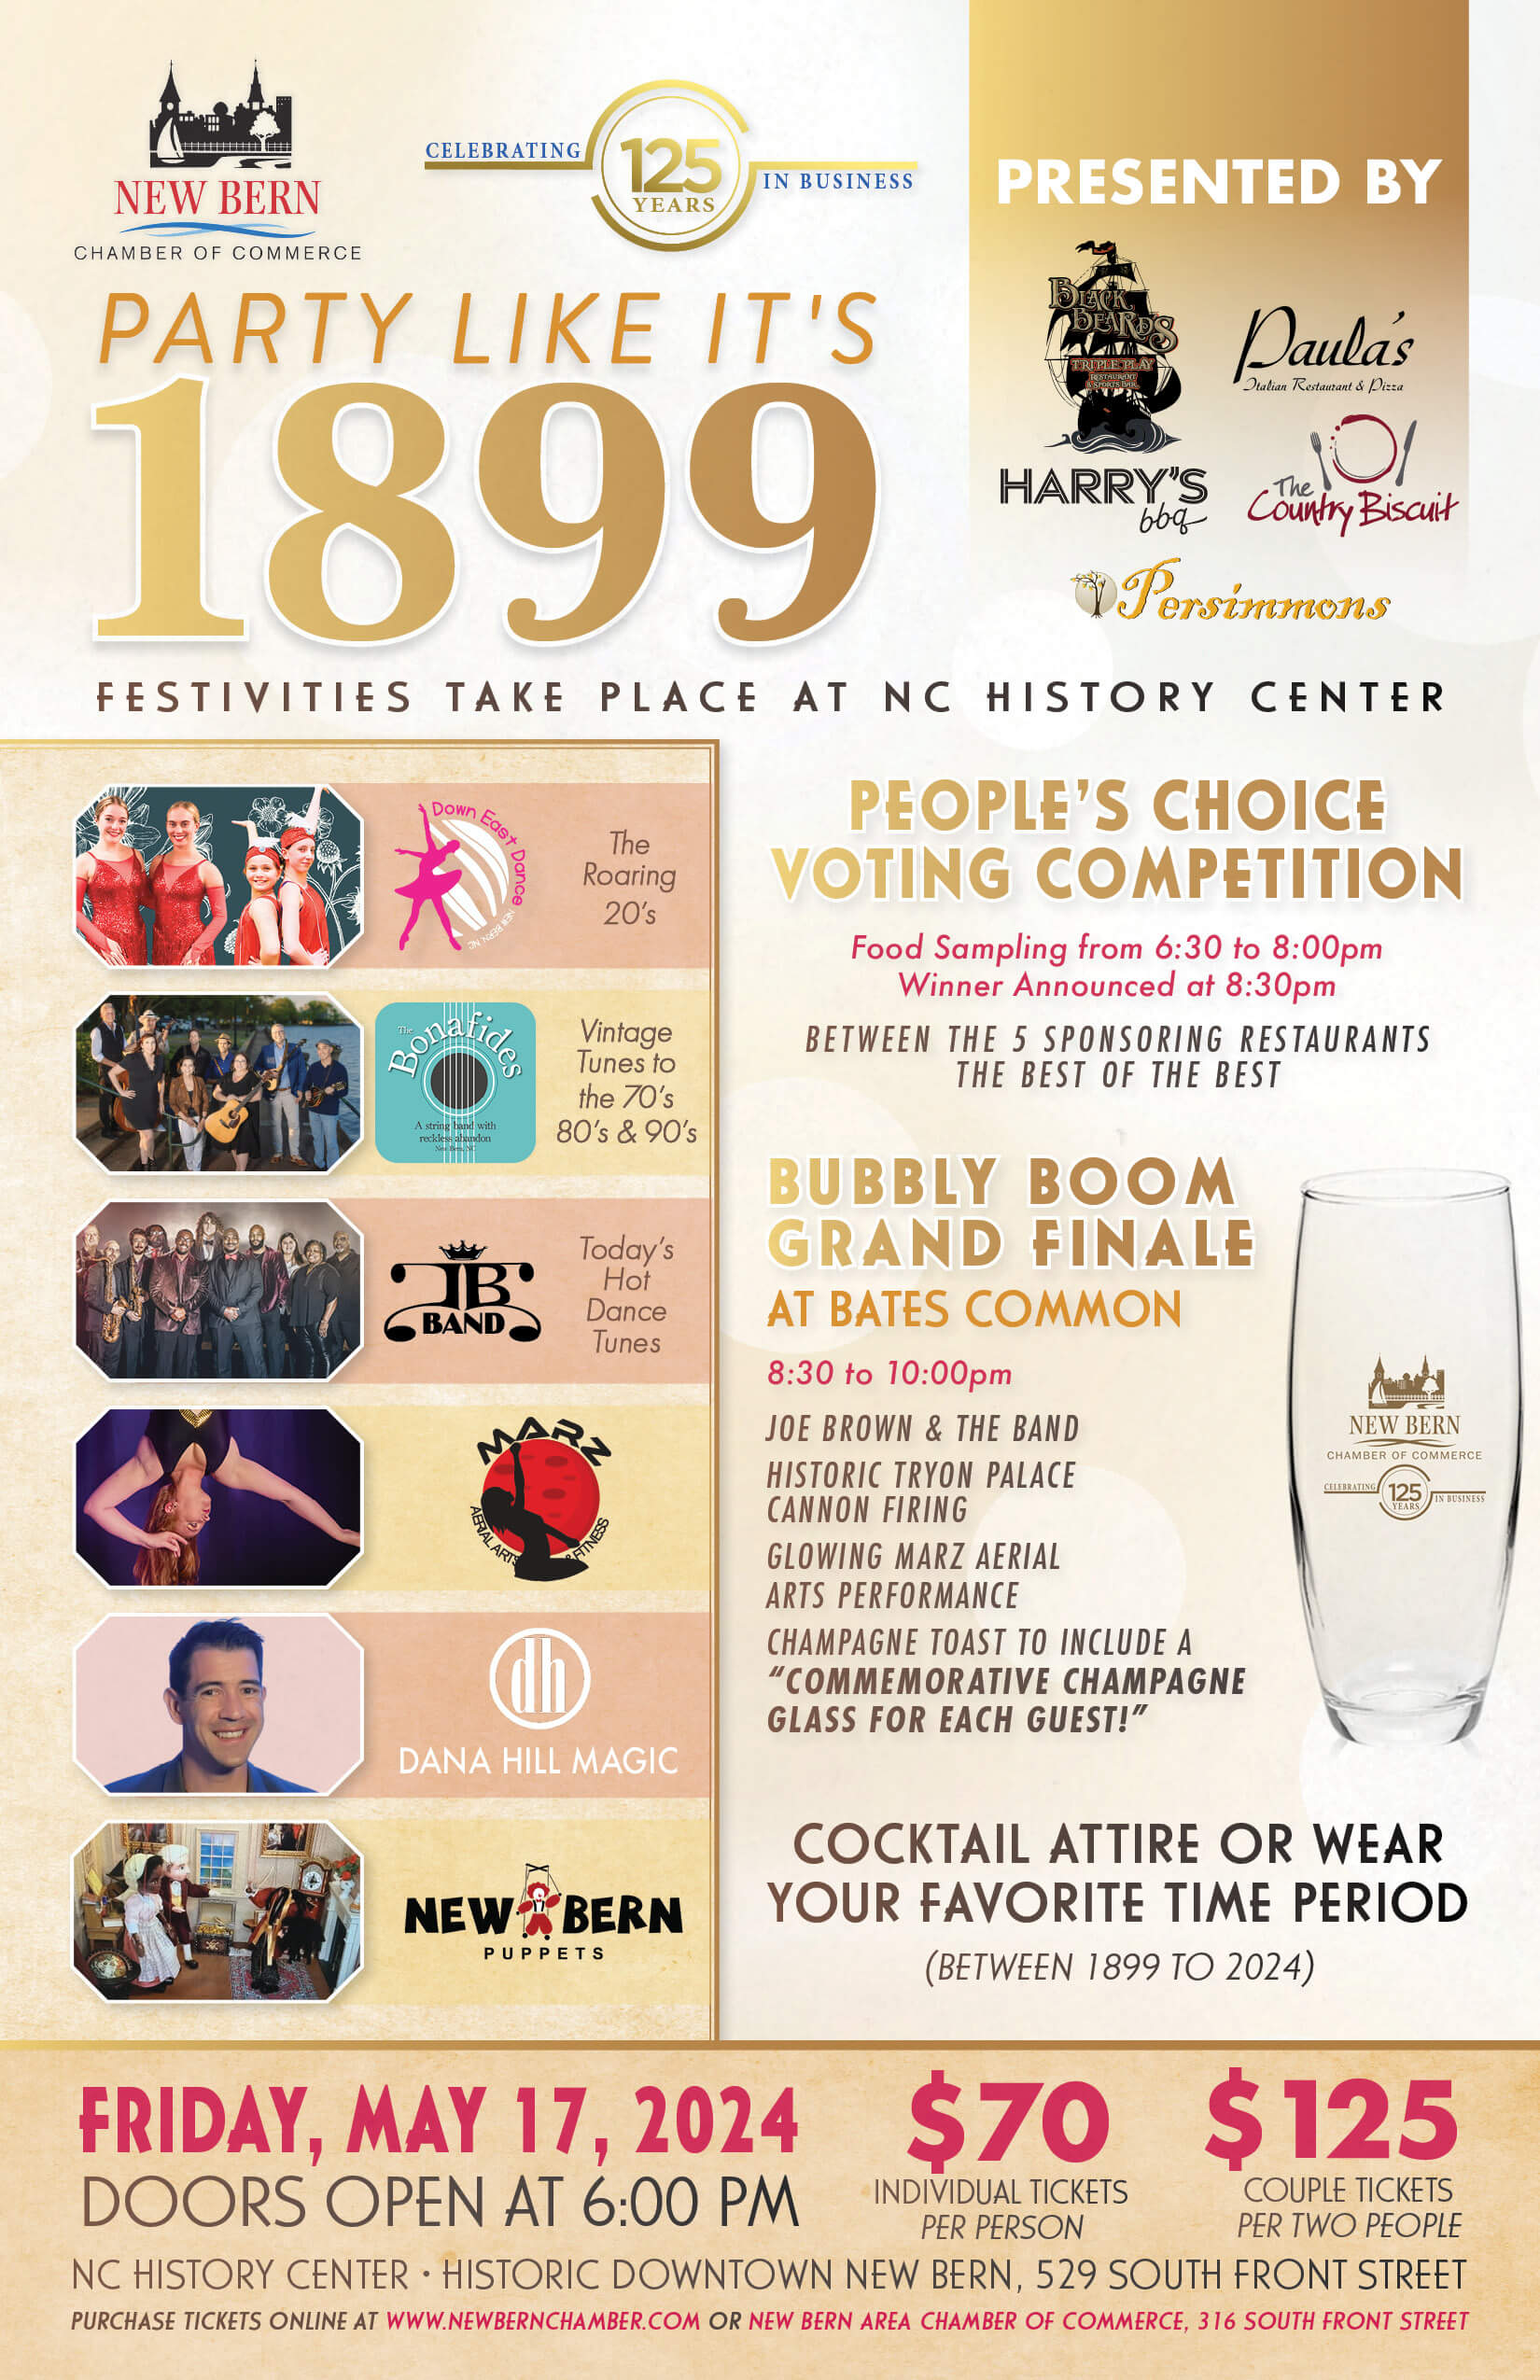 JPEG - NBCC, Party Like's It's 1899